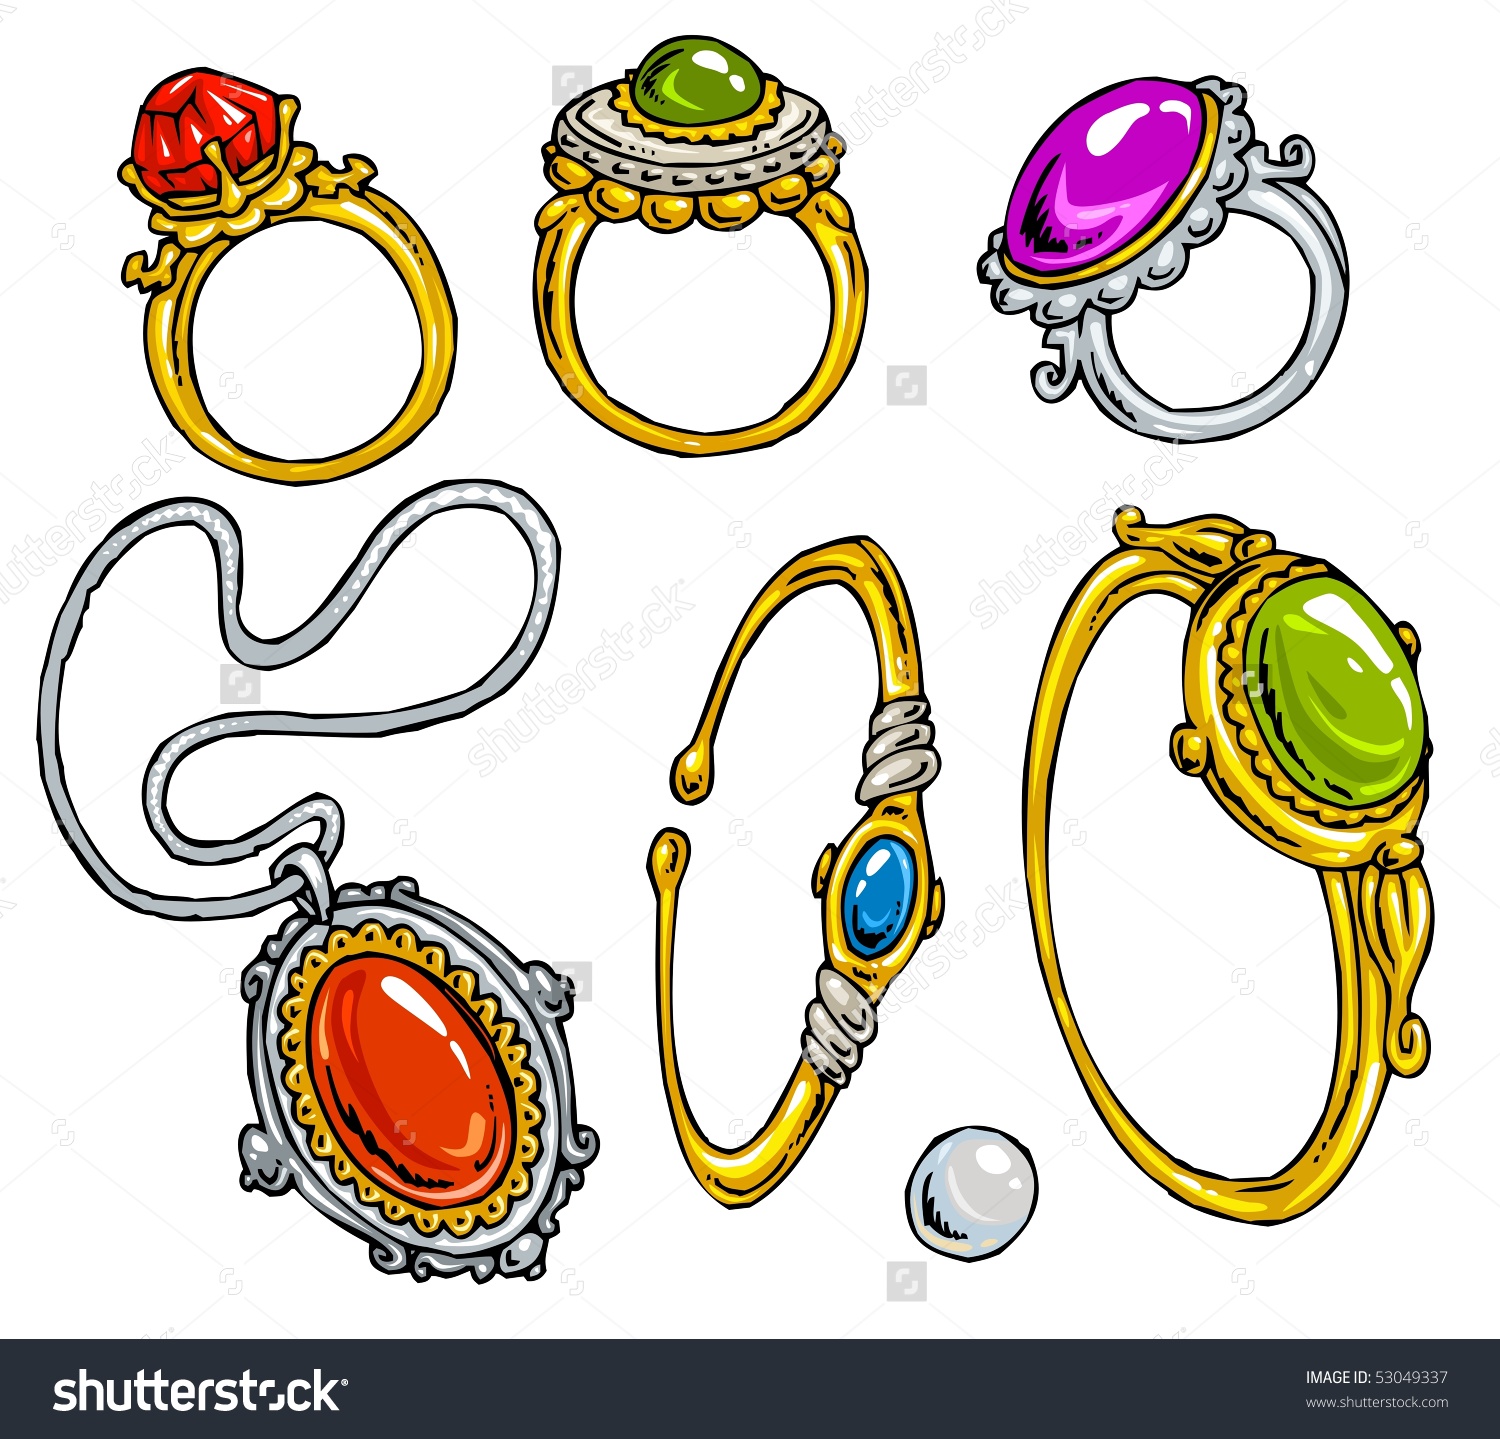 Jewelry clipart - ClipartFest - Jewelry Clipart